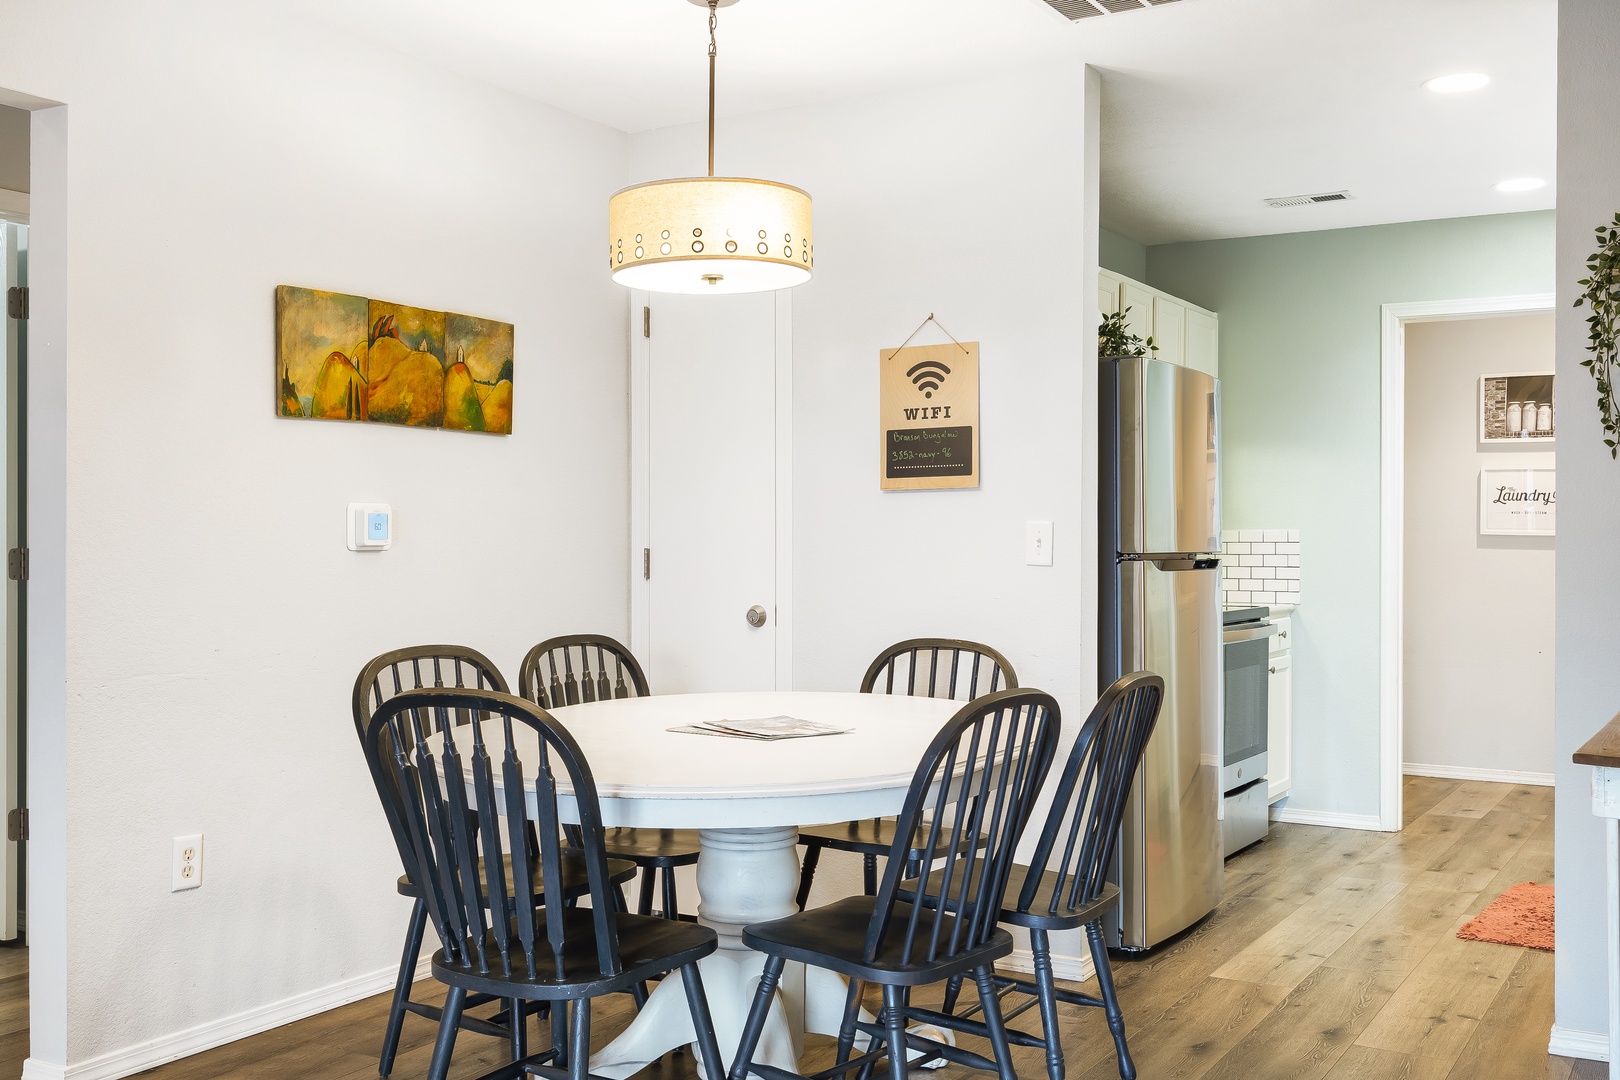 Gather for meals together at the dinning table, with seating for 6